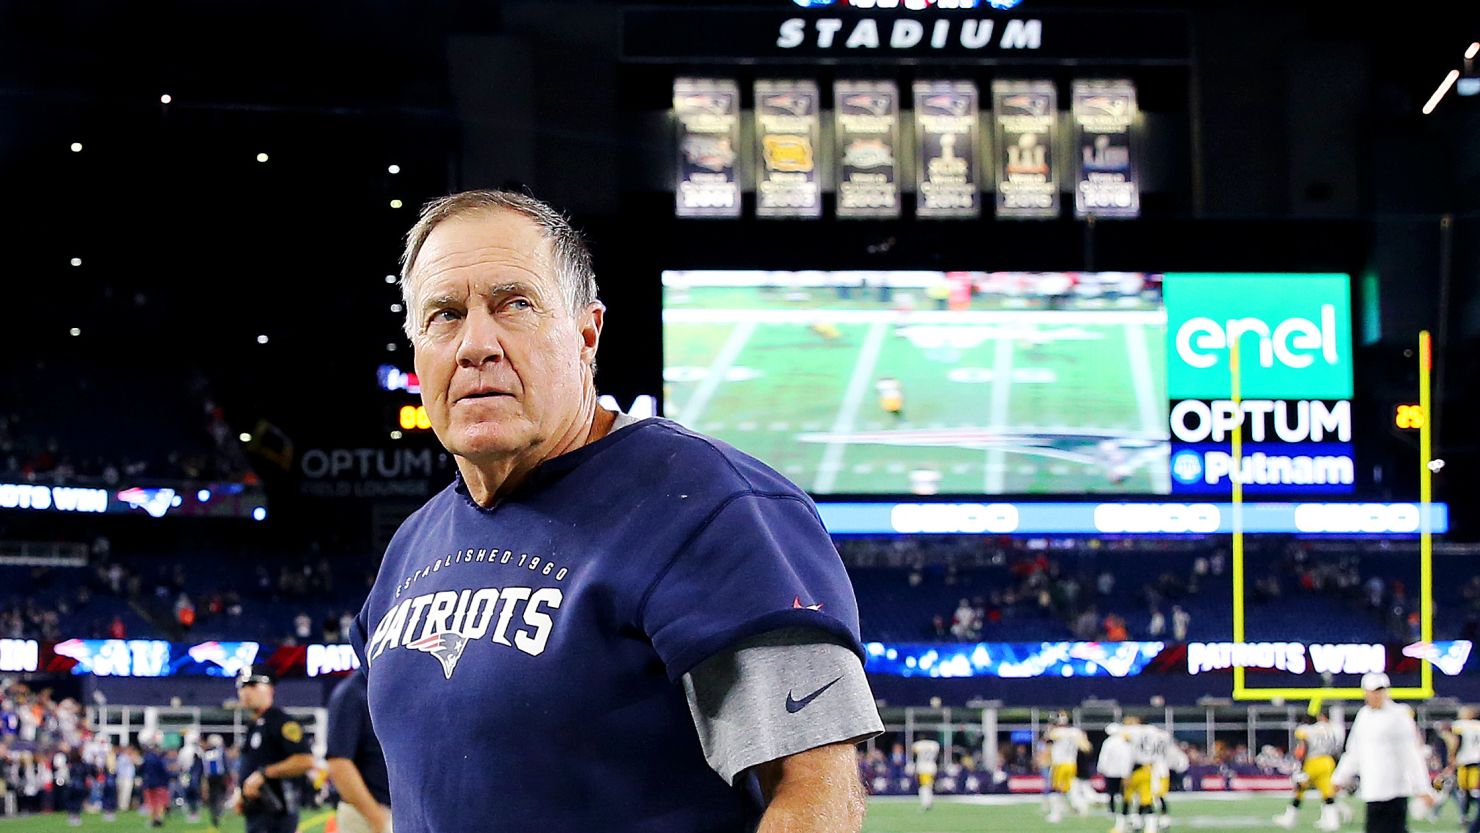 Head coach Bill Belichick of the New England Patriots exits the field after the game between the New England Patriots and the Pittsburgh Steelers at Gillette Stadium on September 8, 2019.